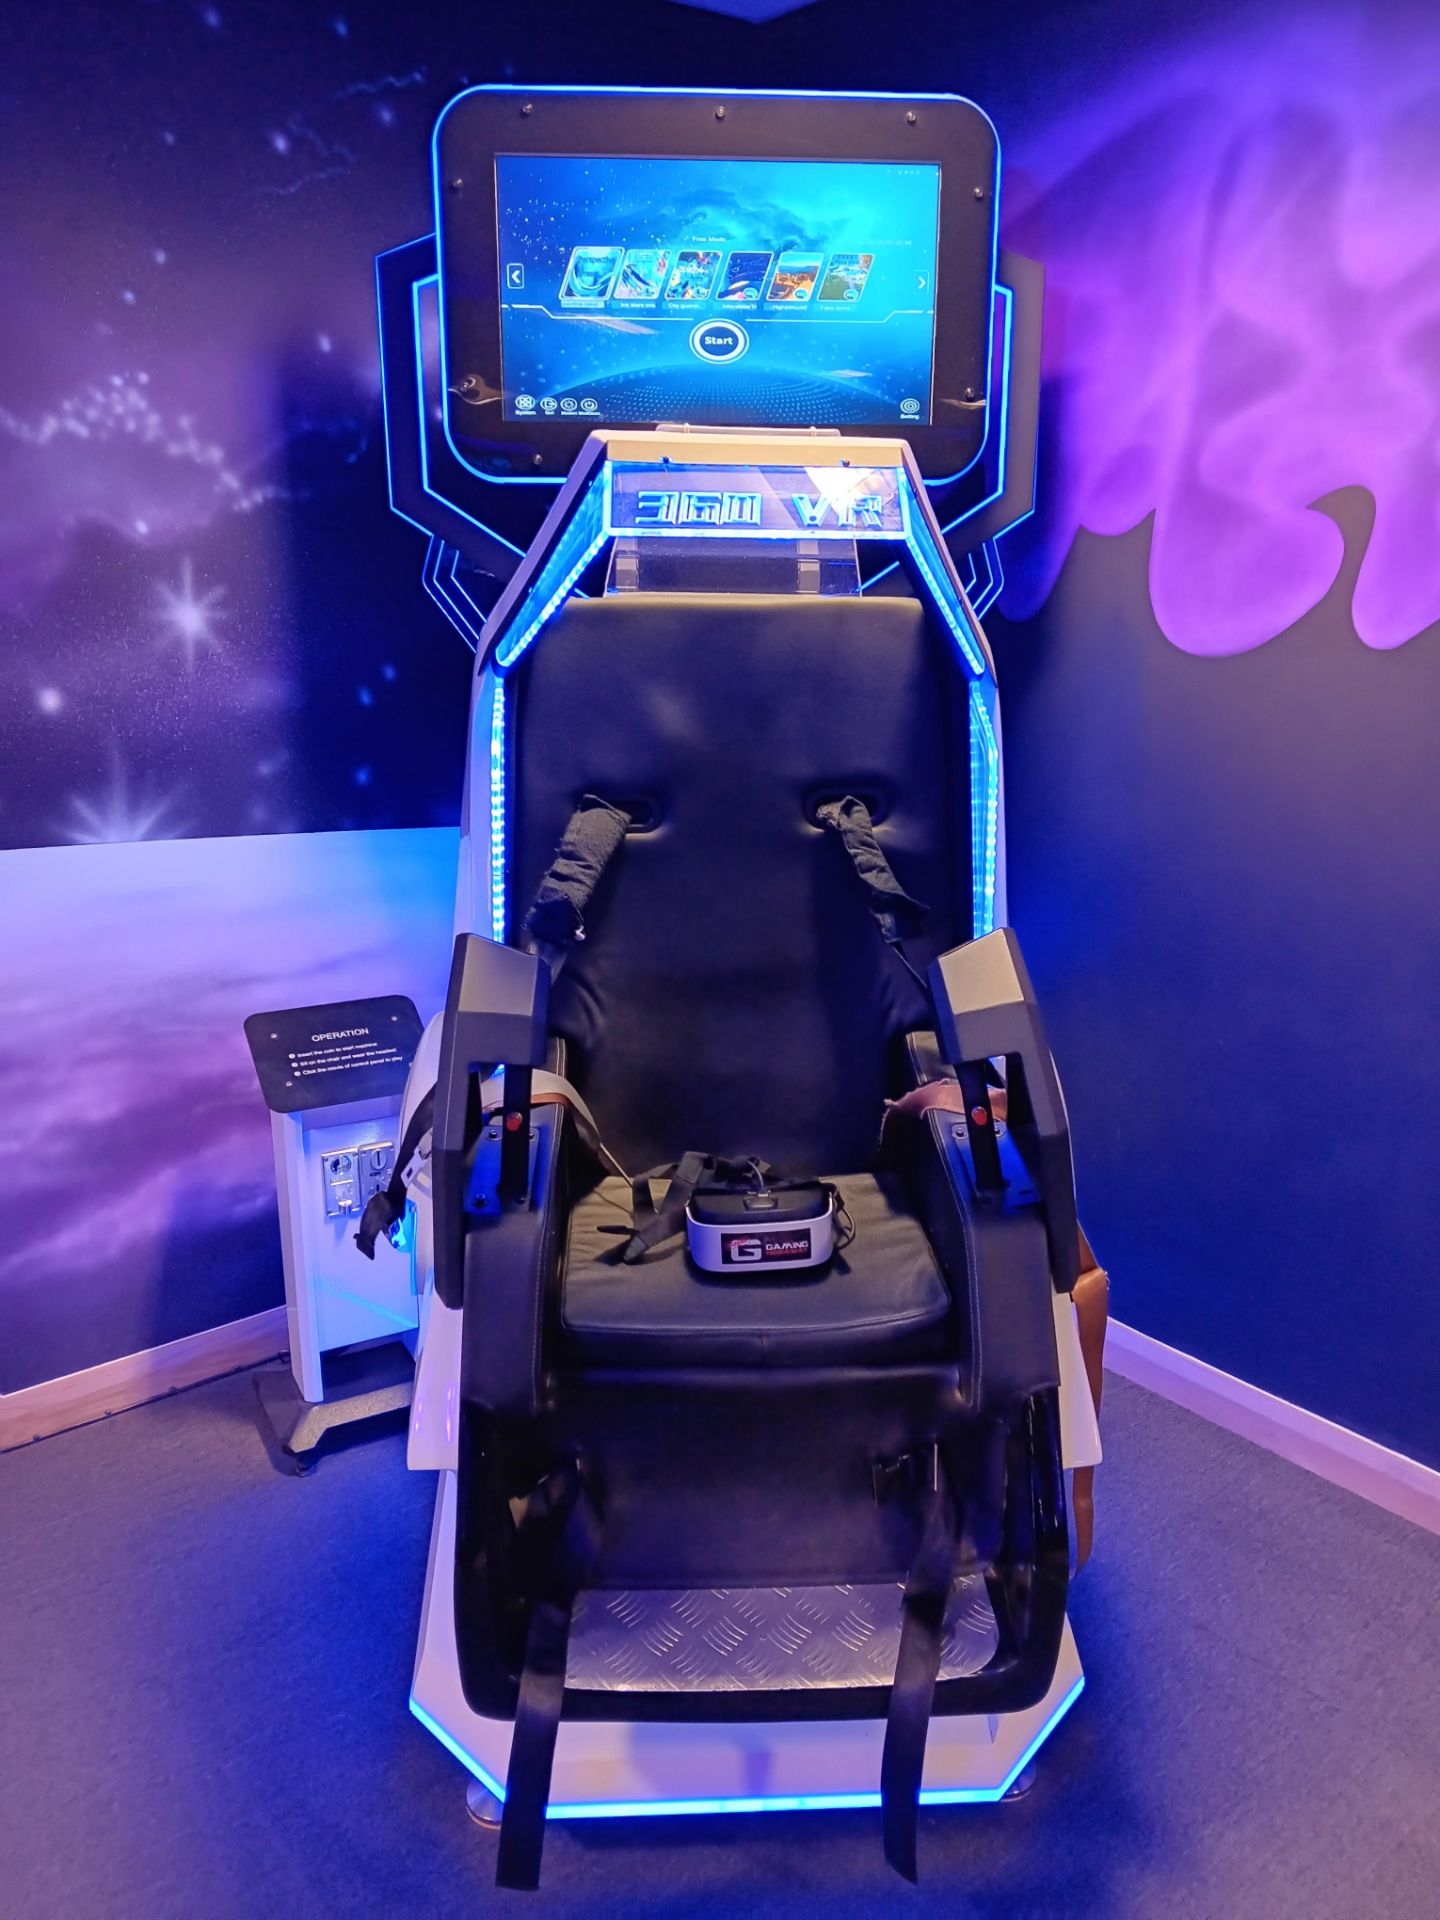 Owatch 360 Degree Rotating VR Chair Roller Coaster Simulator – Cost New £14,400 – Buyer to - Image 4 of 4